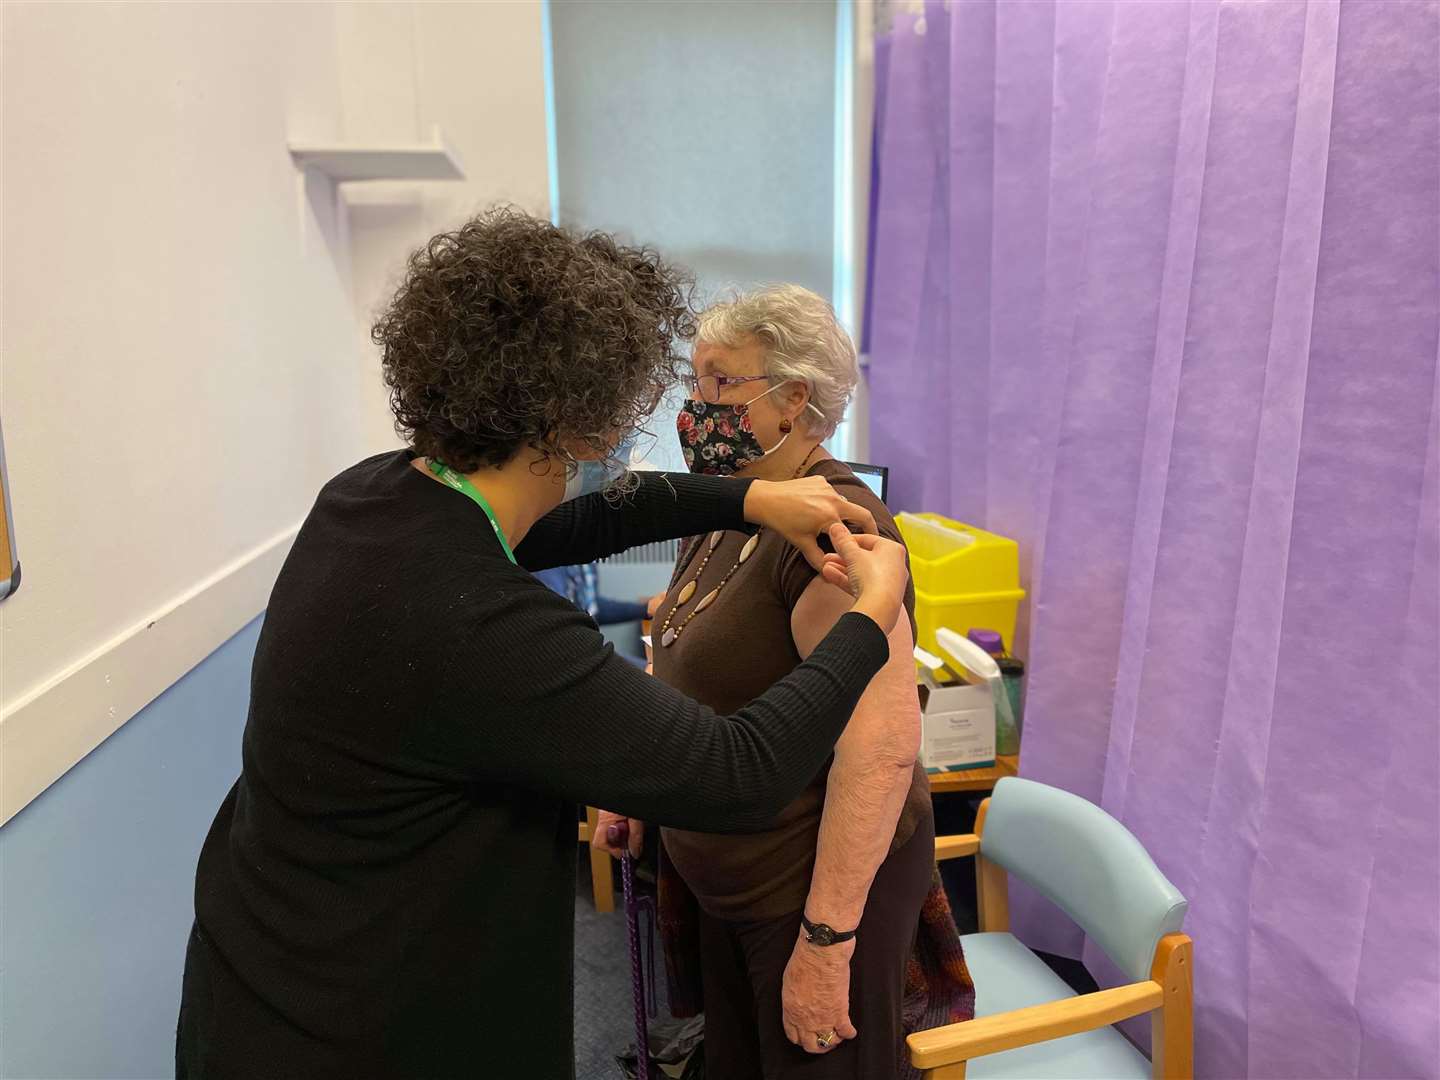 Dr Hilary Audsley, GP at The Chestnuts Surgery in Sittingbourne, giving patient Rowena Mount her first dose of the coronavirus vaccine at Sittingbourne's hub